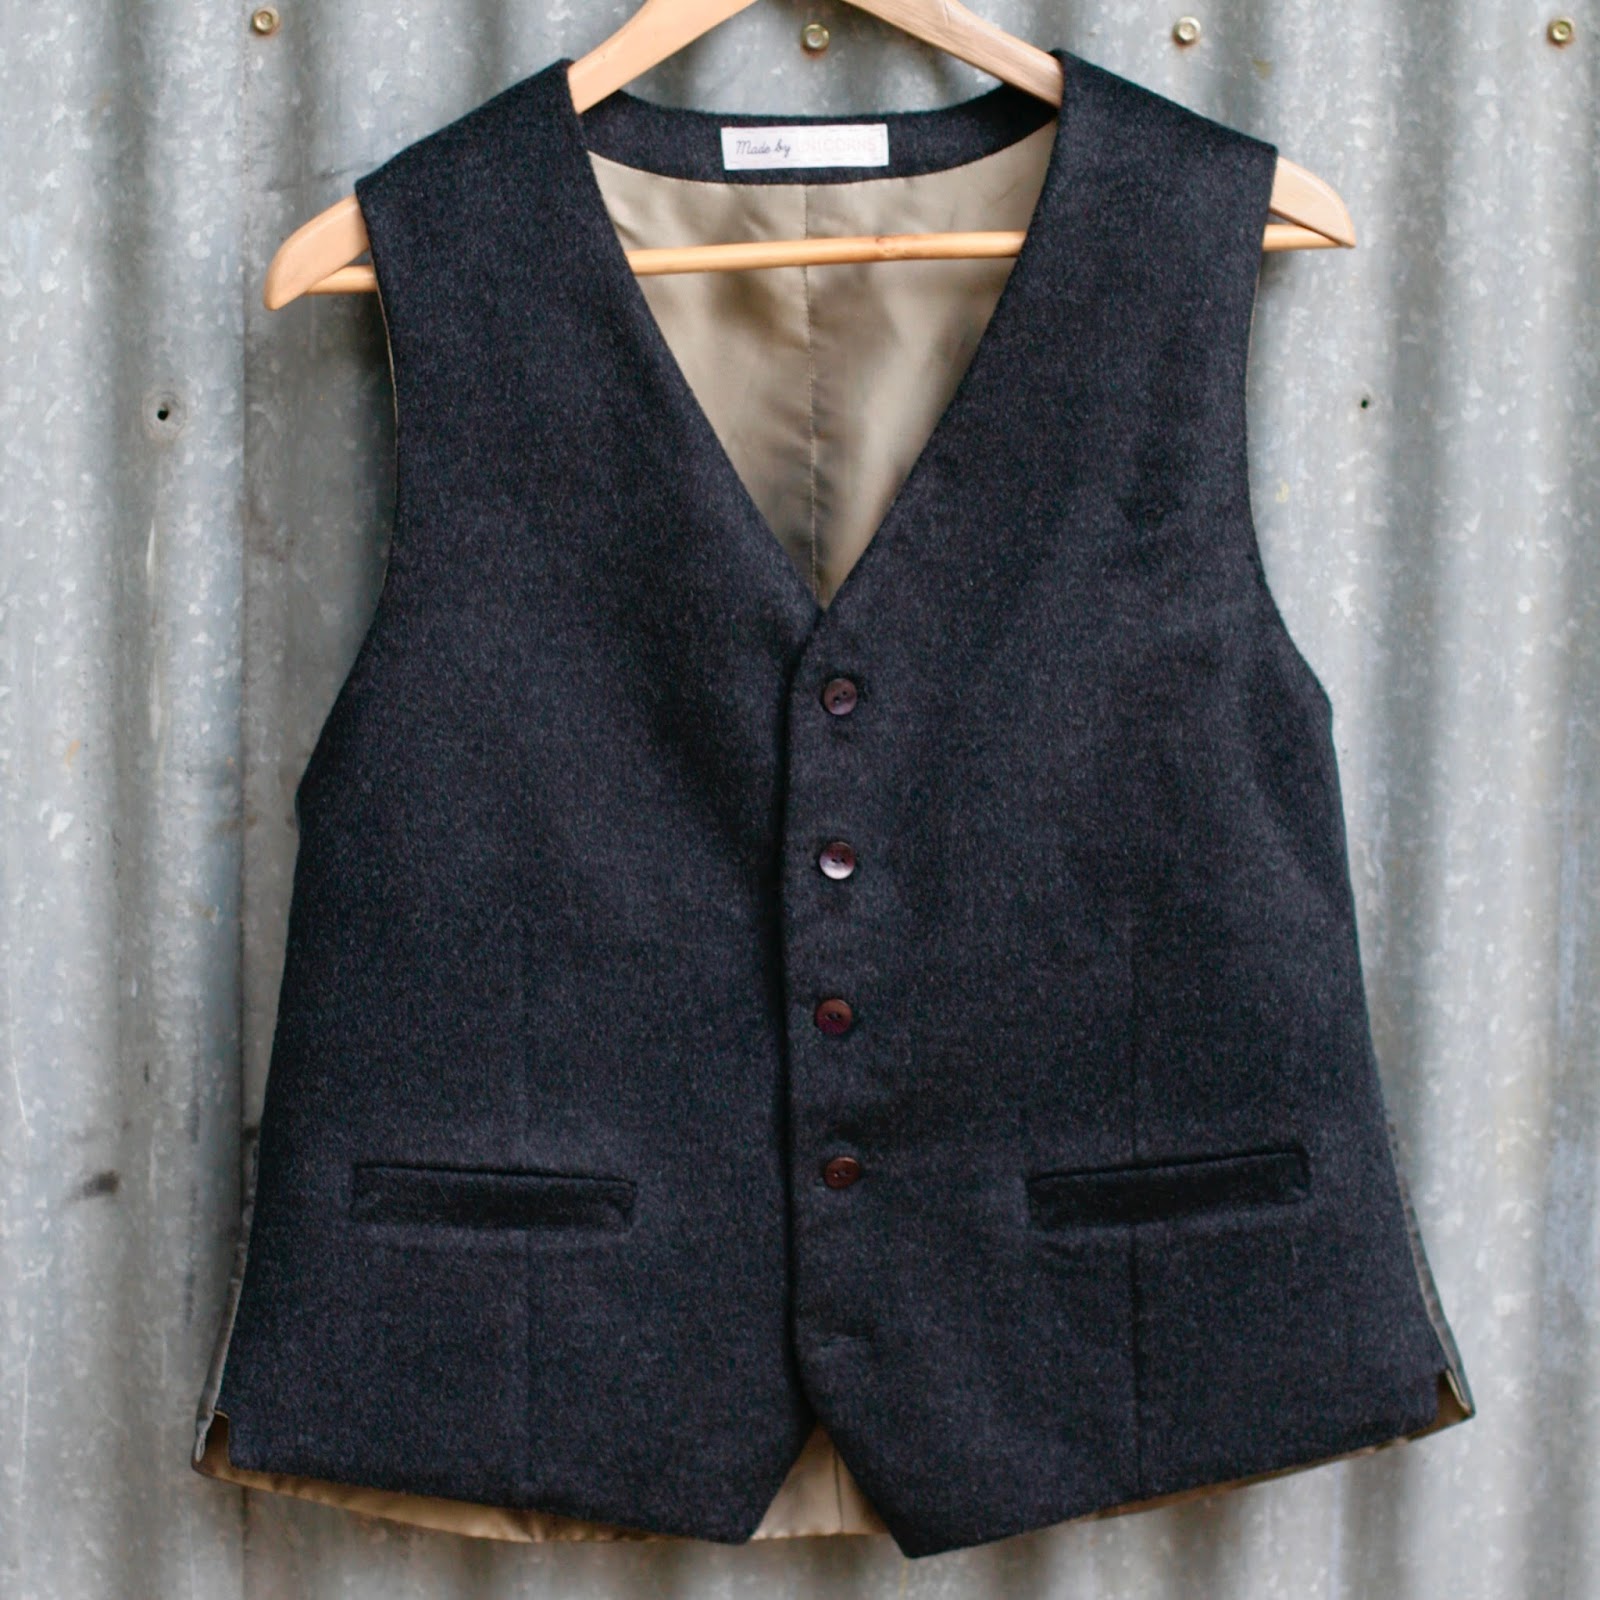 Pattern Review: Thread Theory Belvedere Waistcoat